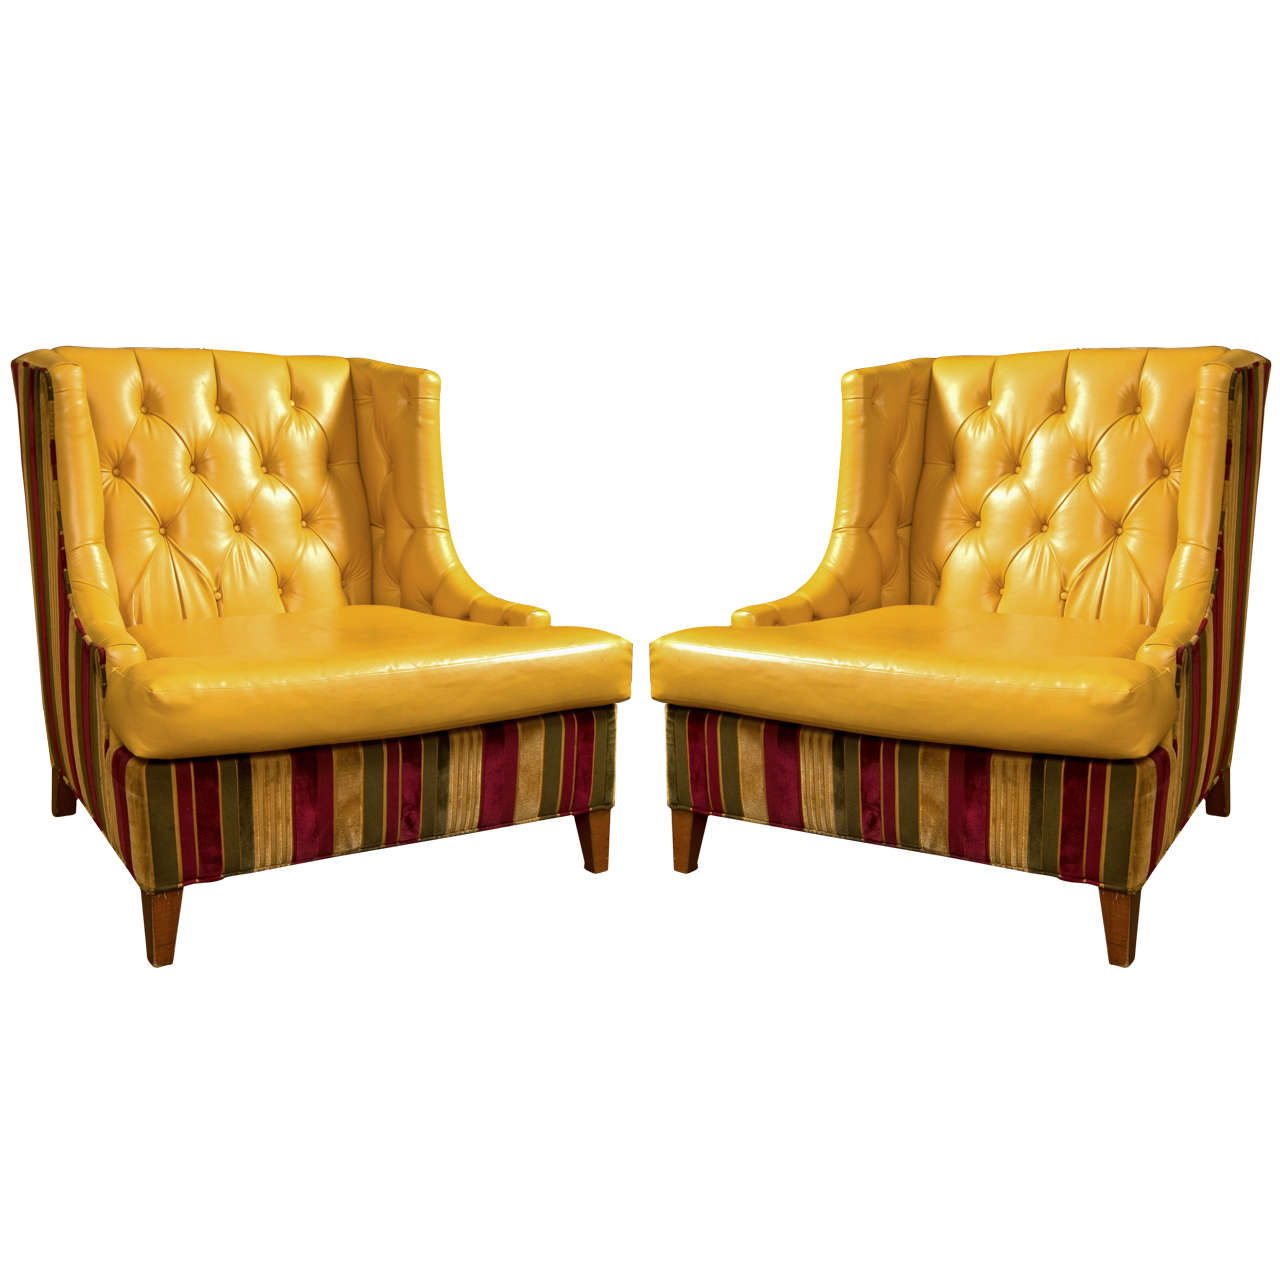 Pair of Mid-Century Modern Tufted Leather Wing Chairs